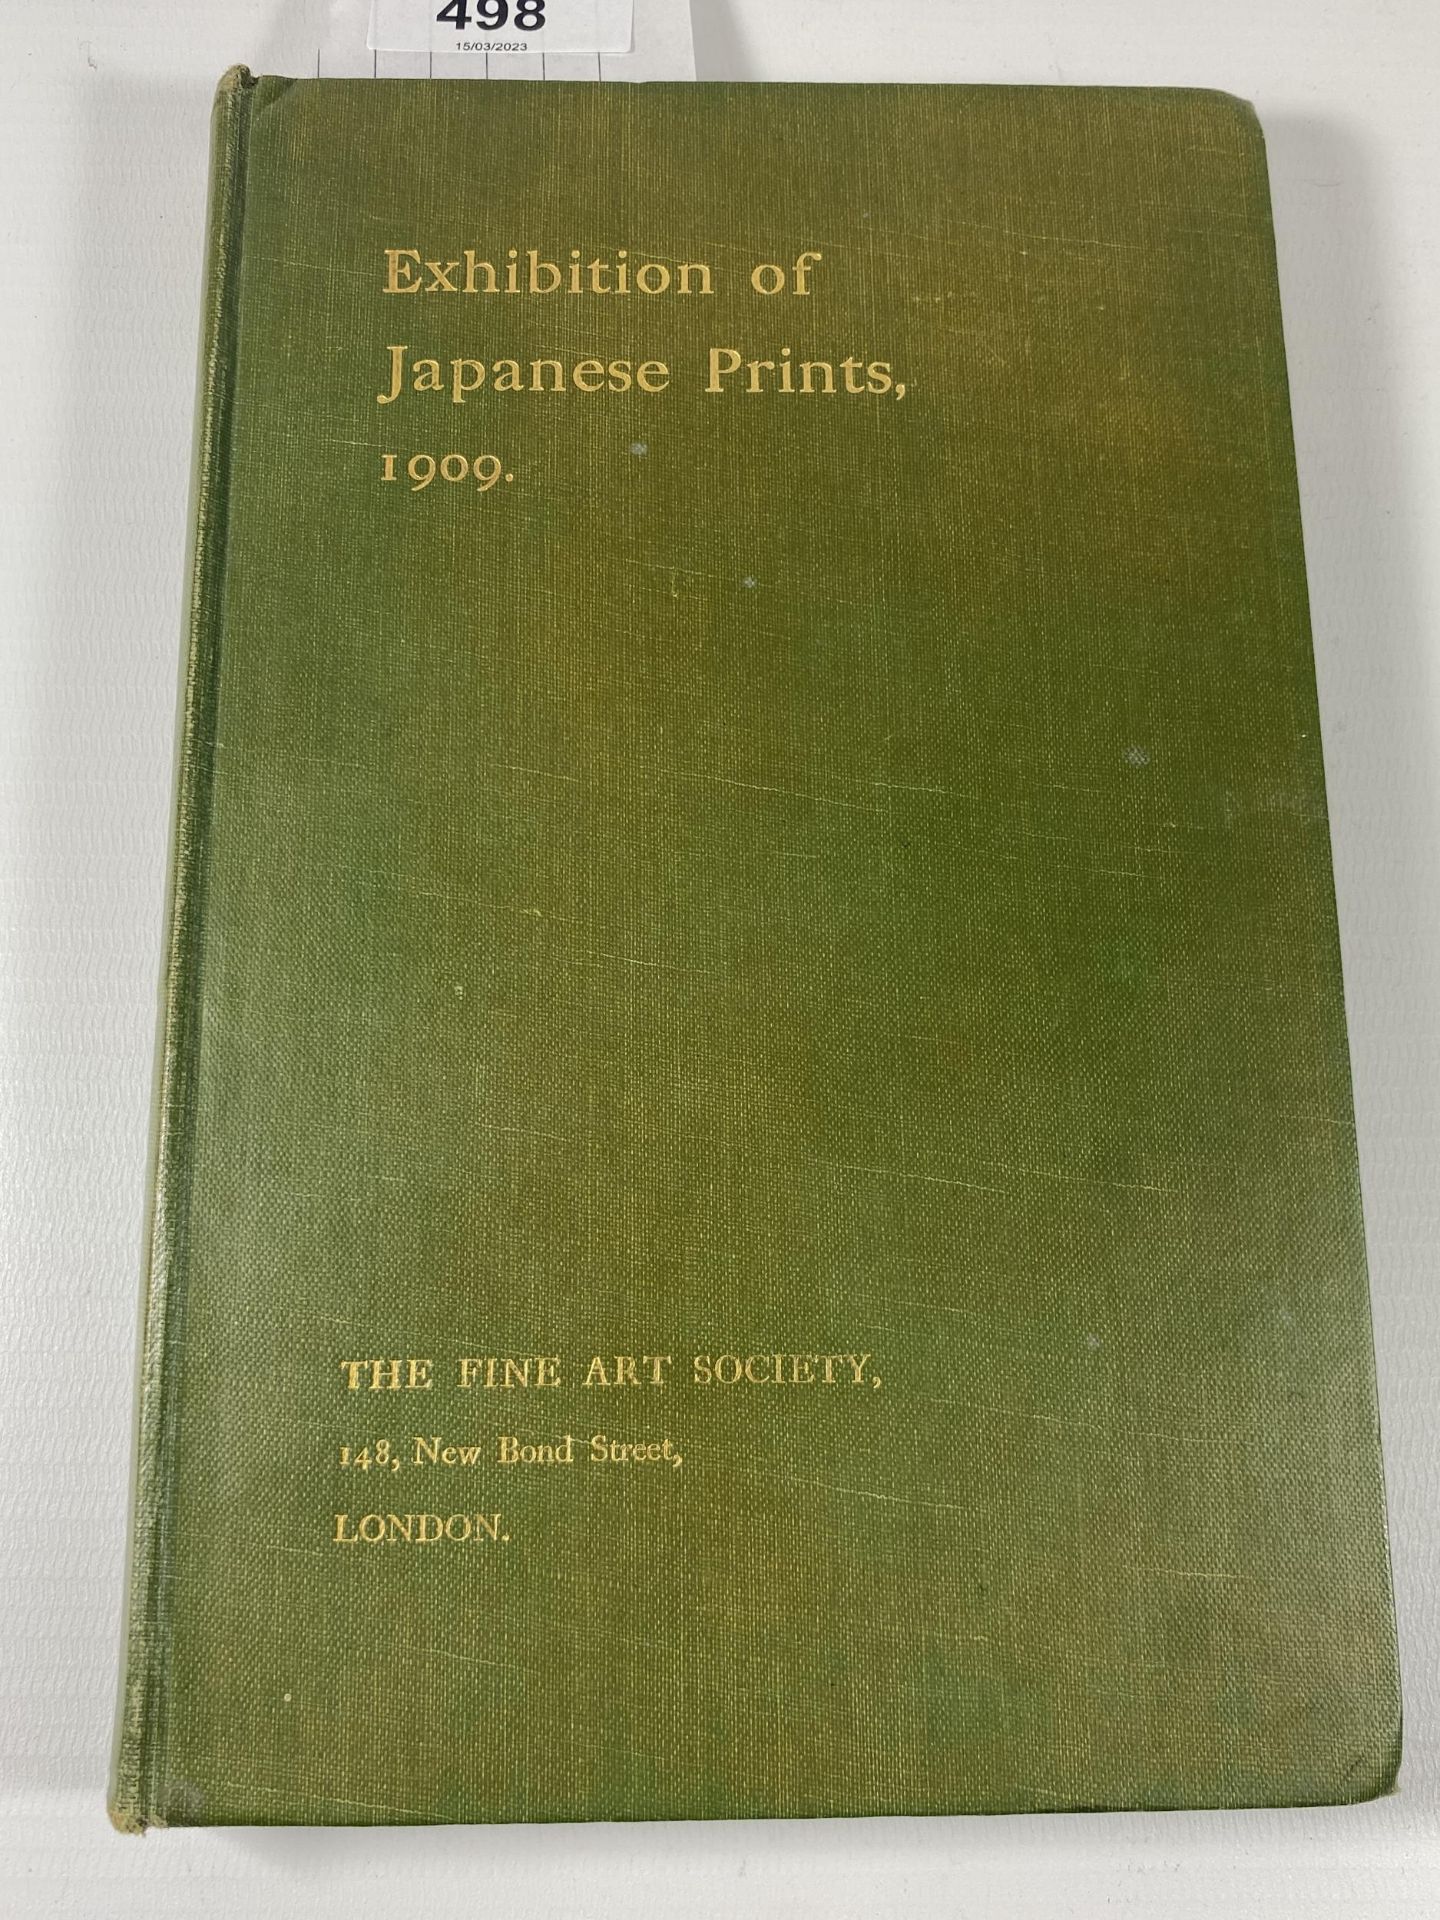 AN EXHIBITION OF JAPANESE PRINTS 1909 FINE ART SOCIETY BOOK